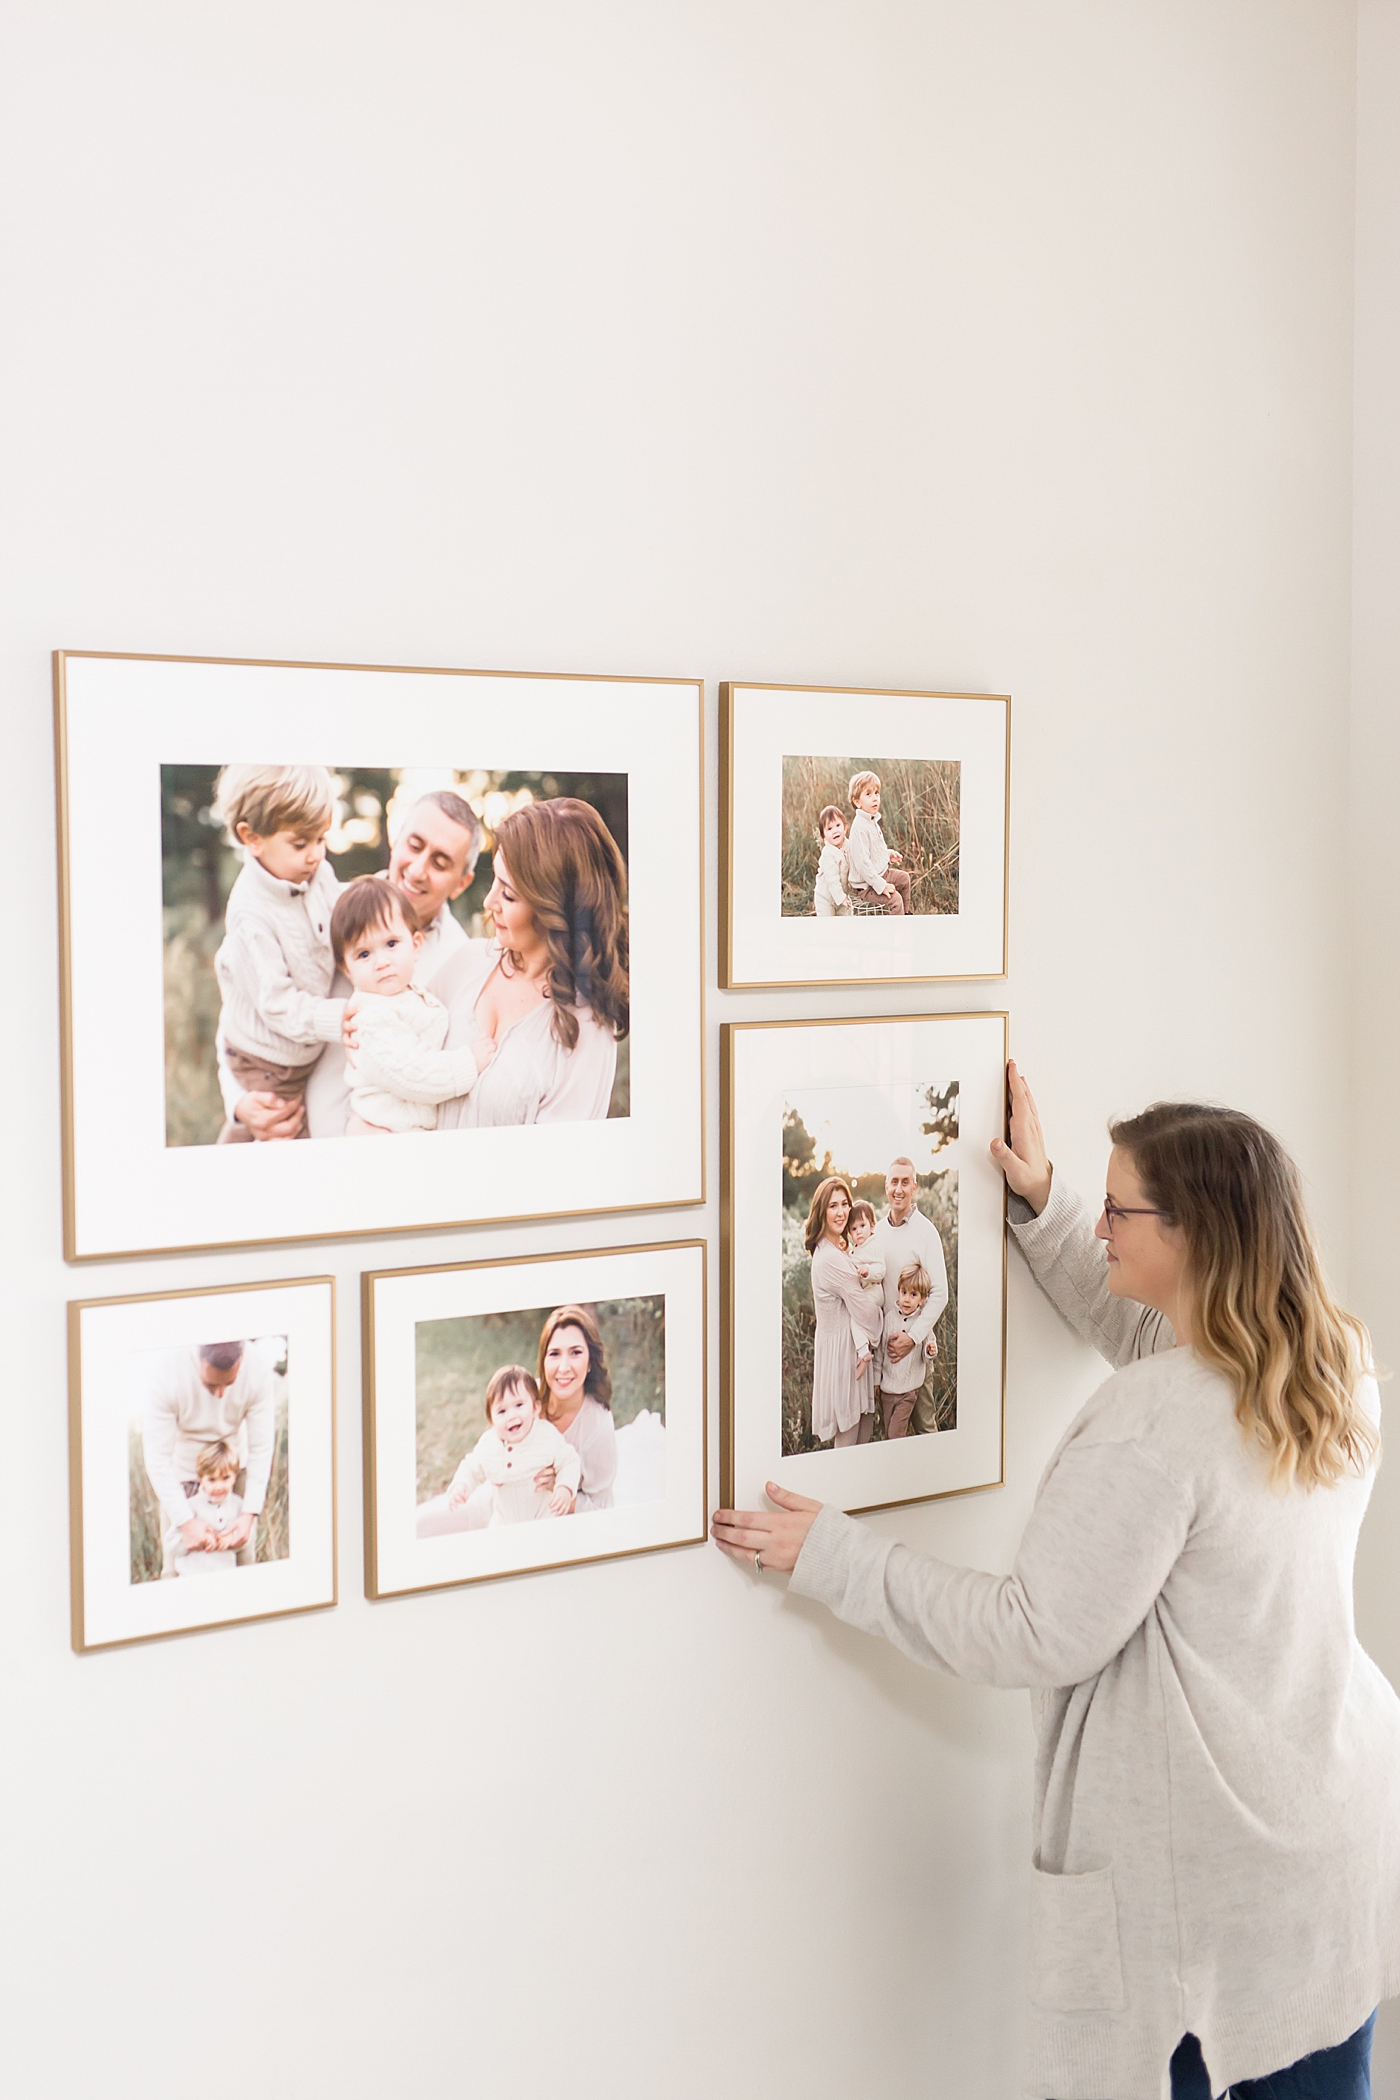 Leigh with Fresh Light Photography installs beautiful gallery wall in client's home in Houston.